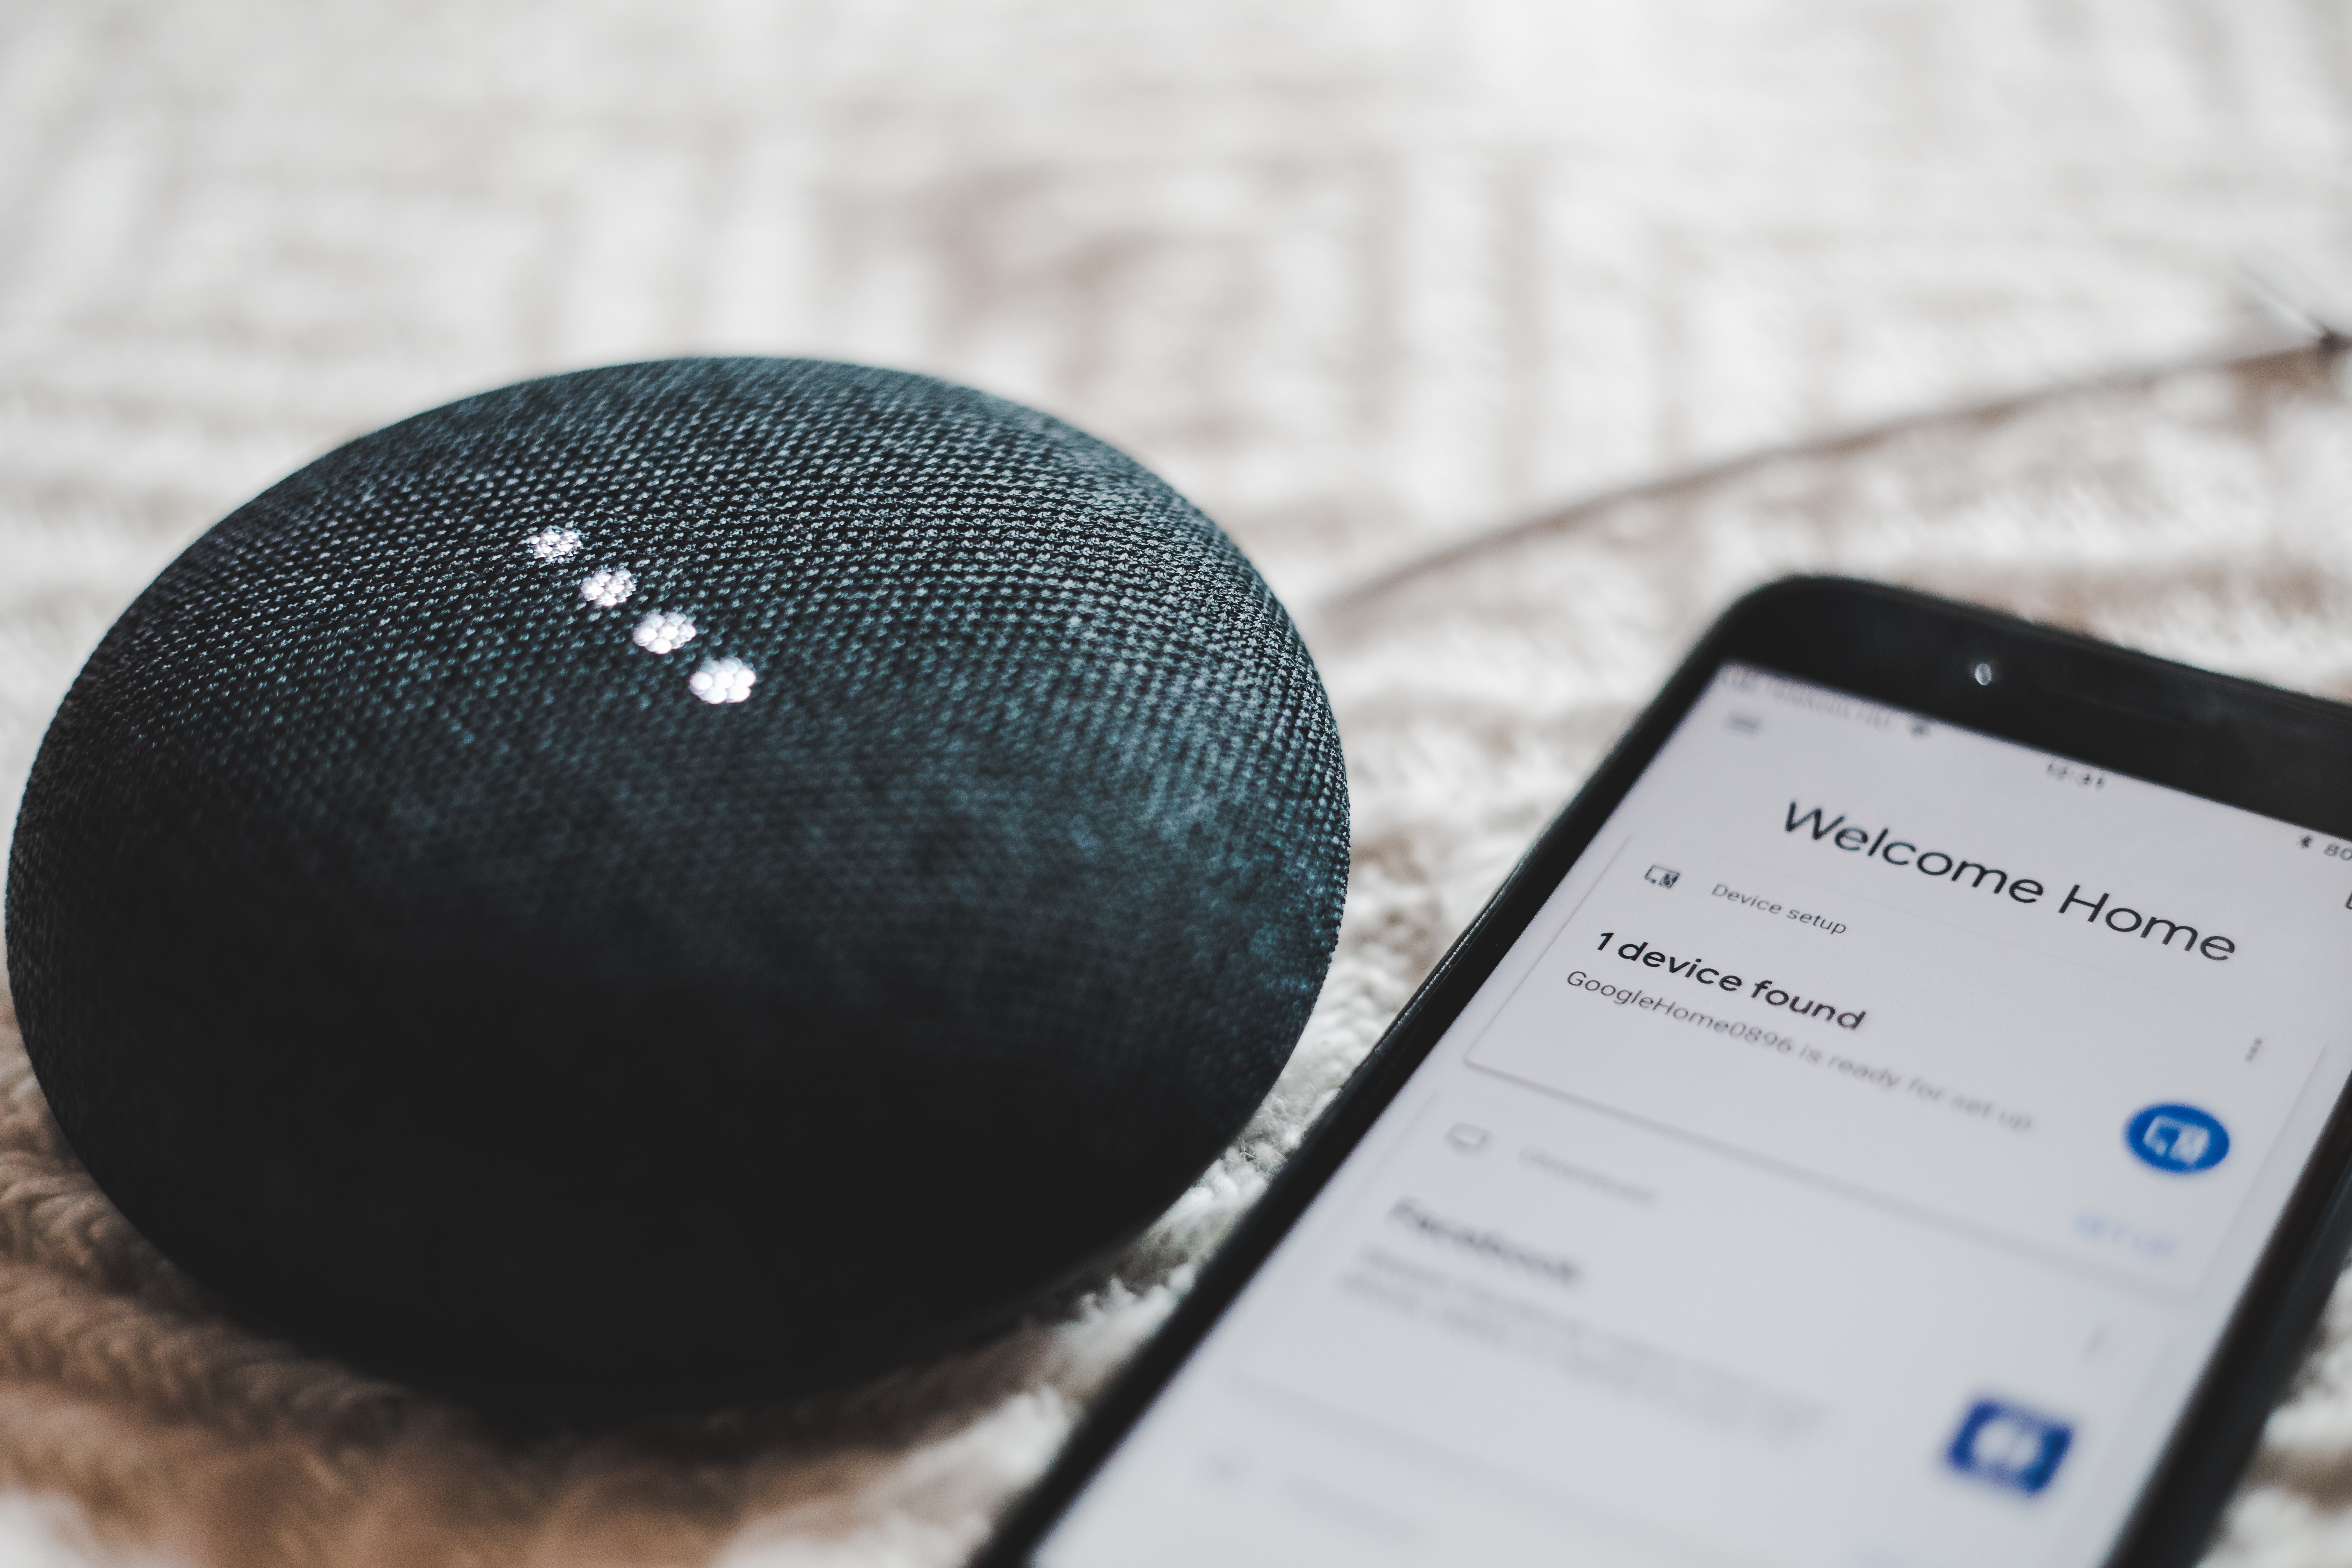 Companies such as Apple, Google, and Amazon have harnessed the power of ChatGPT speech to create virtual assistants like Siri, Google Assistant, and Alexa. 